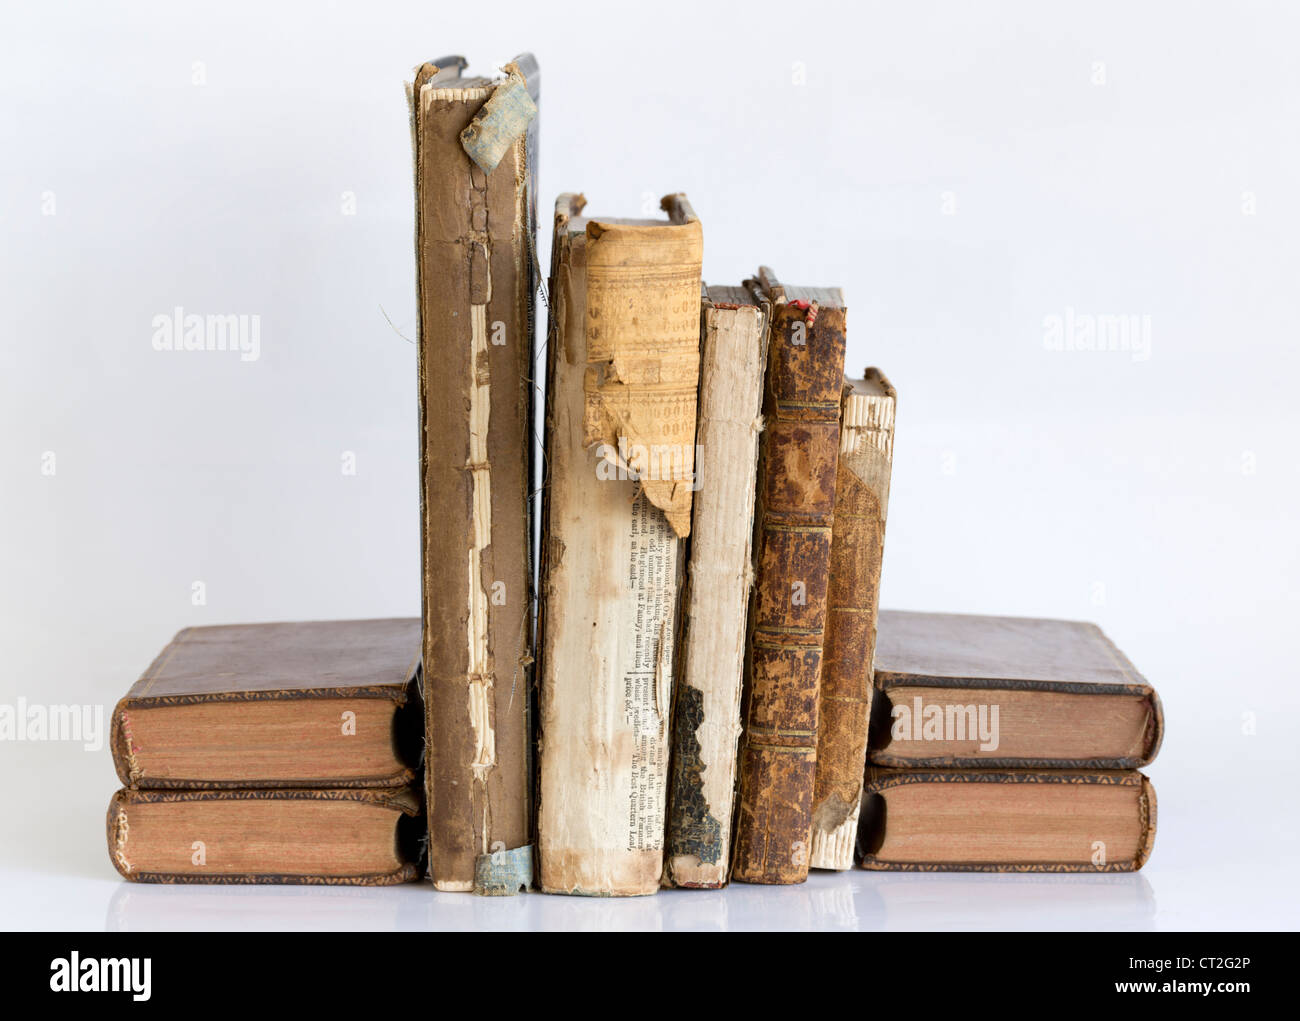 Volumes of old books with damaged covers Stock Photo